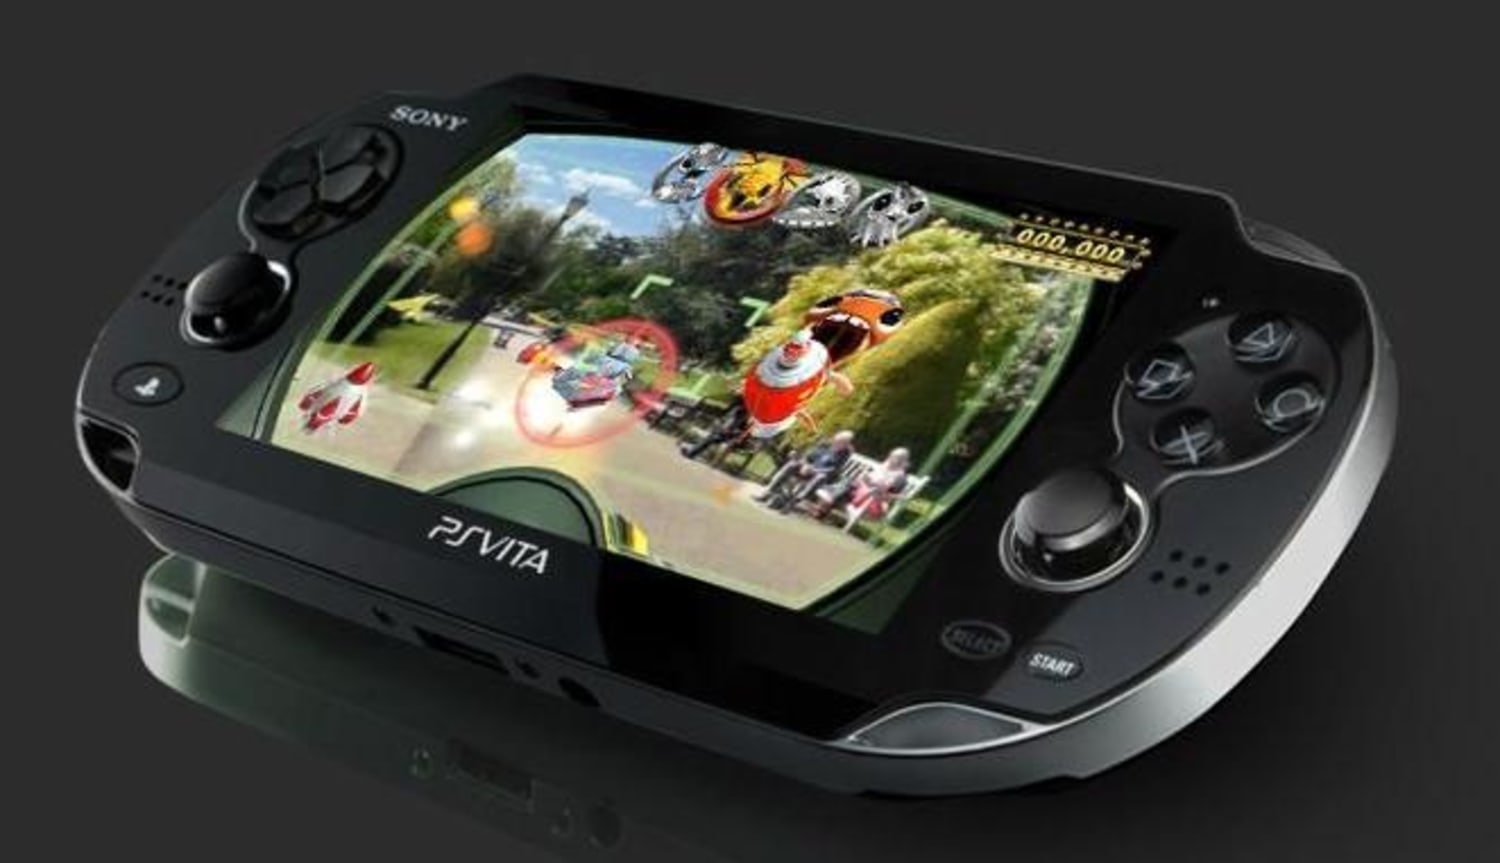 Sony Will Launch Playstation Vita In Japan With 26 Games